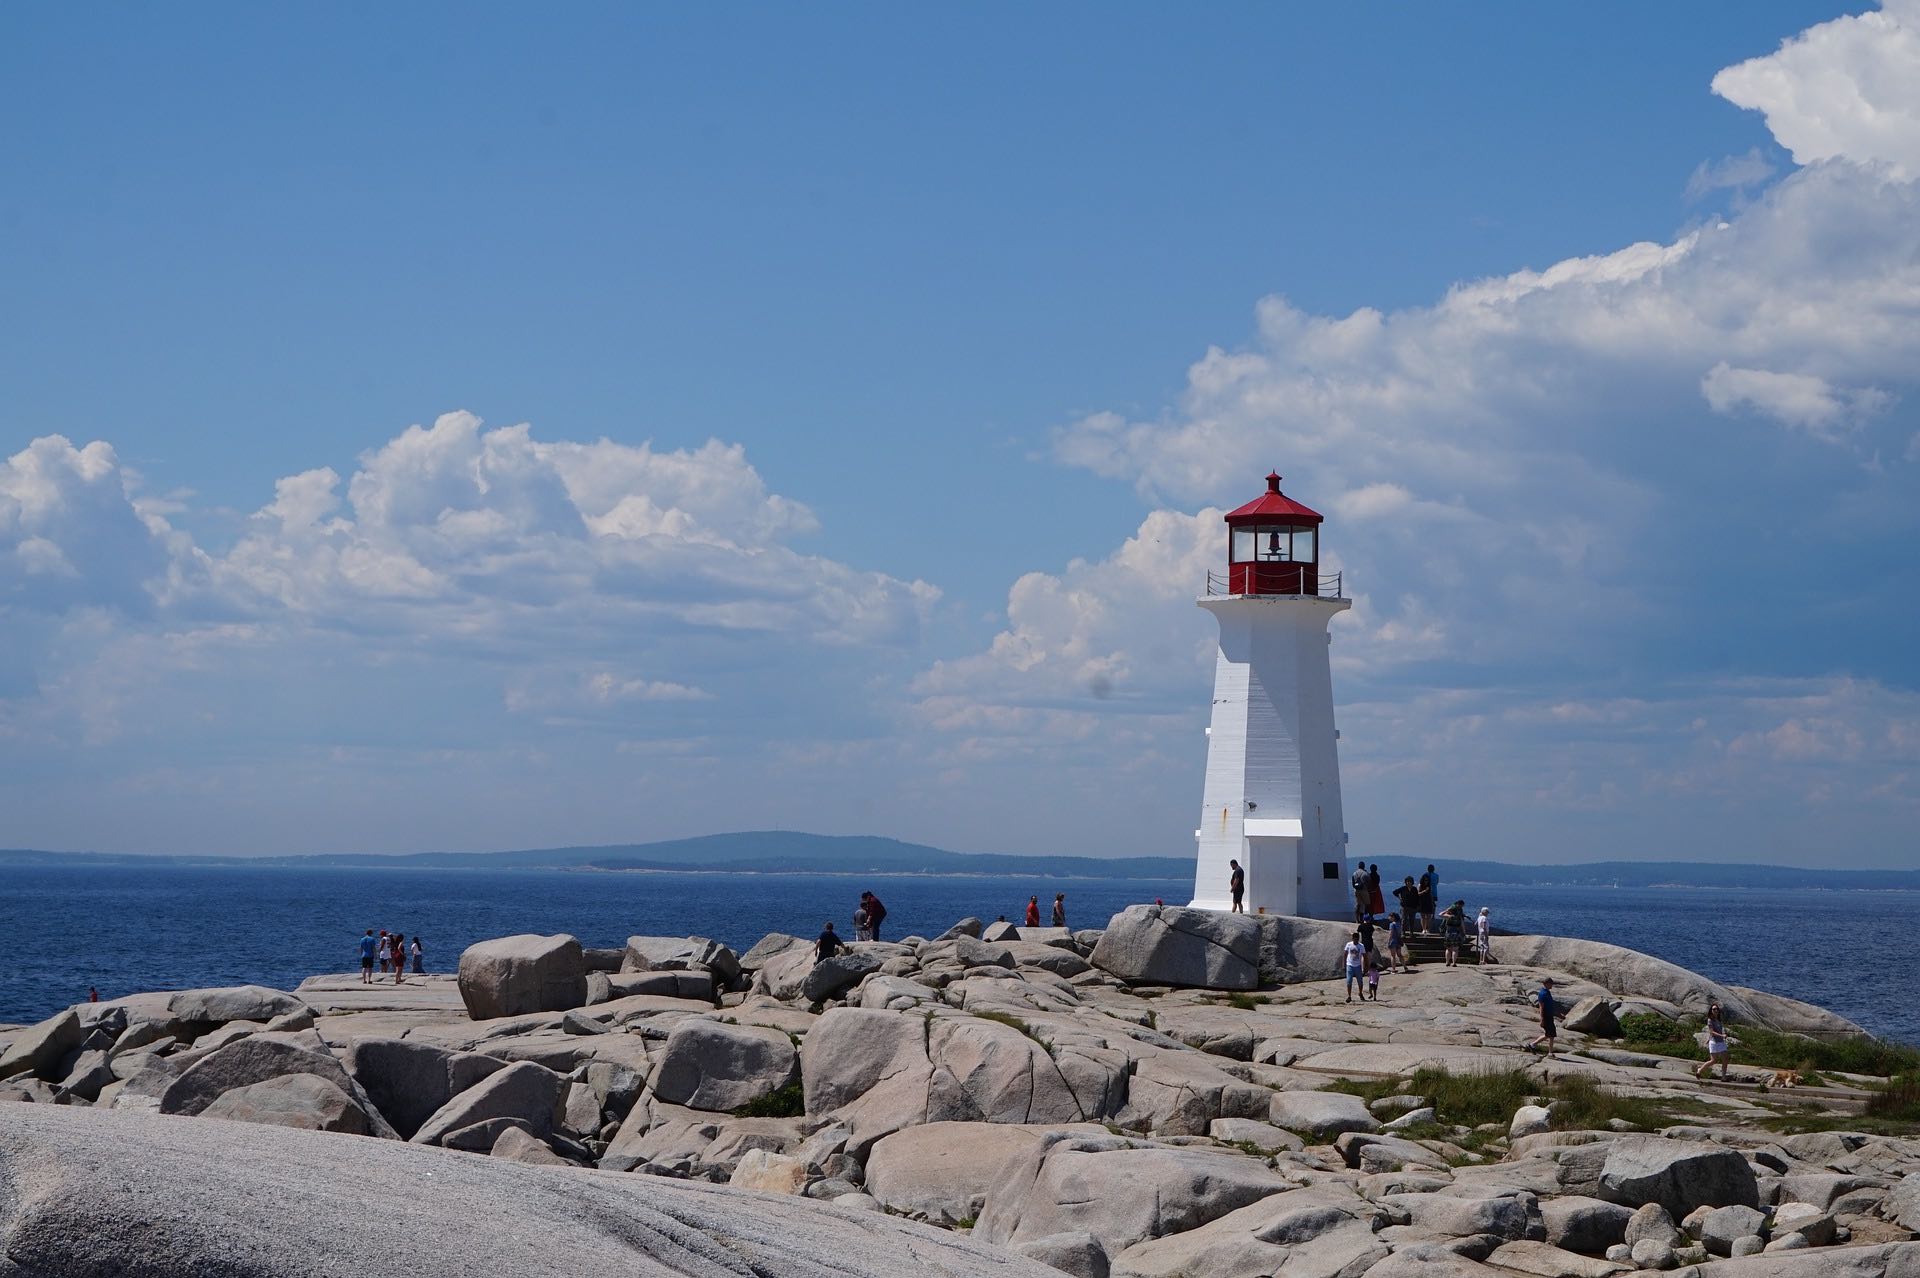 The iconic Peggy's Cove lighthouse is a selfie must!